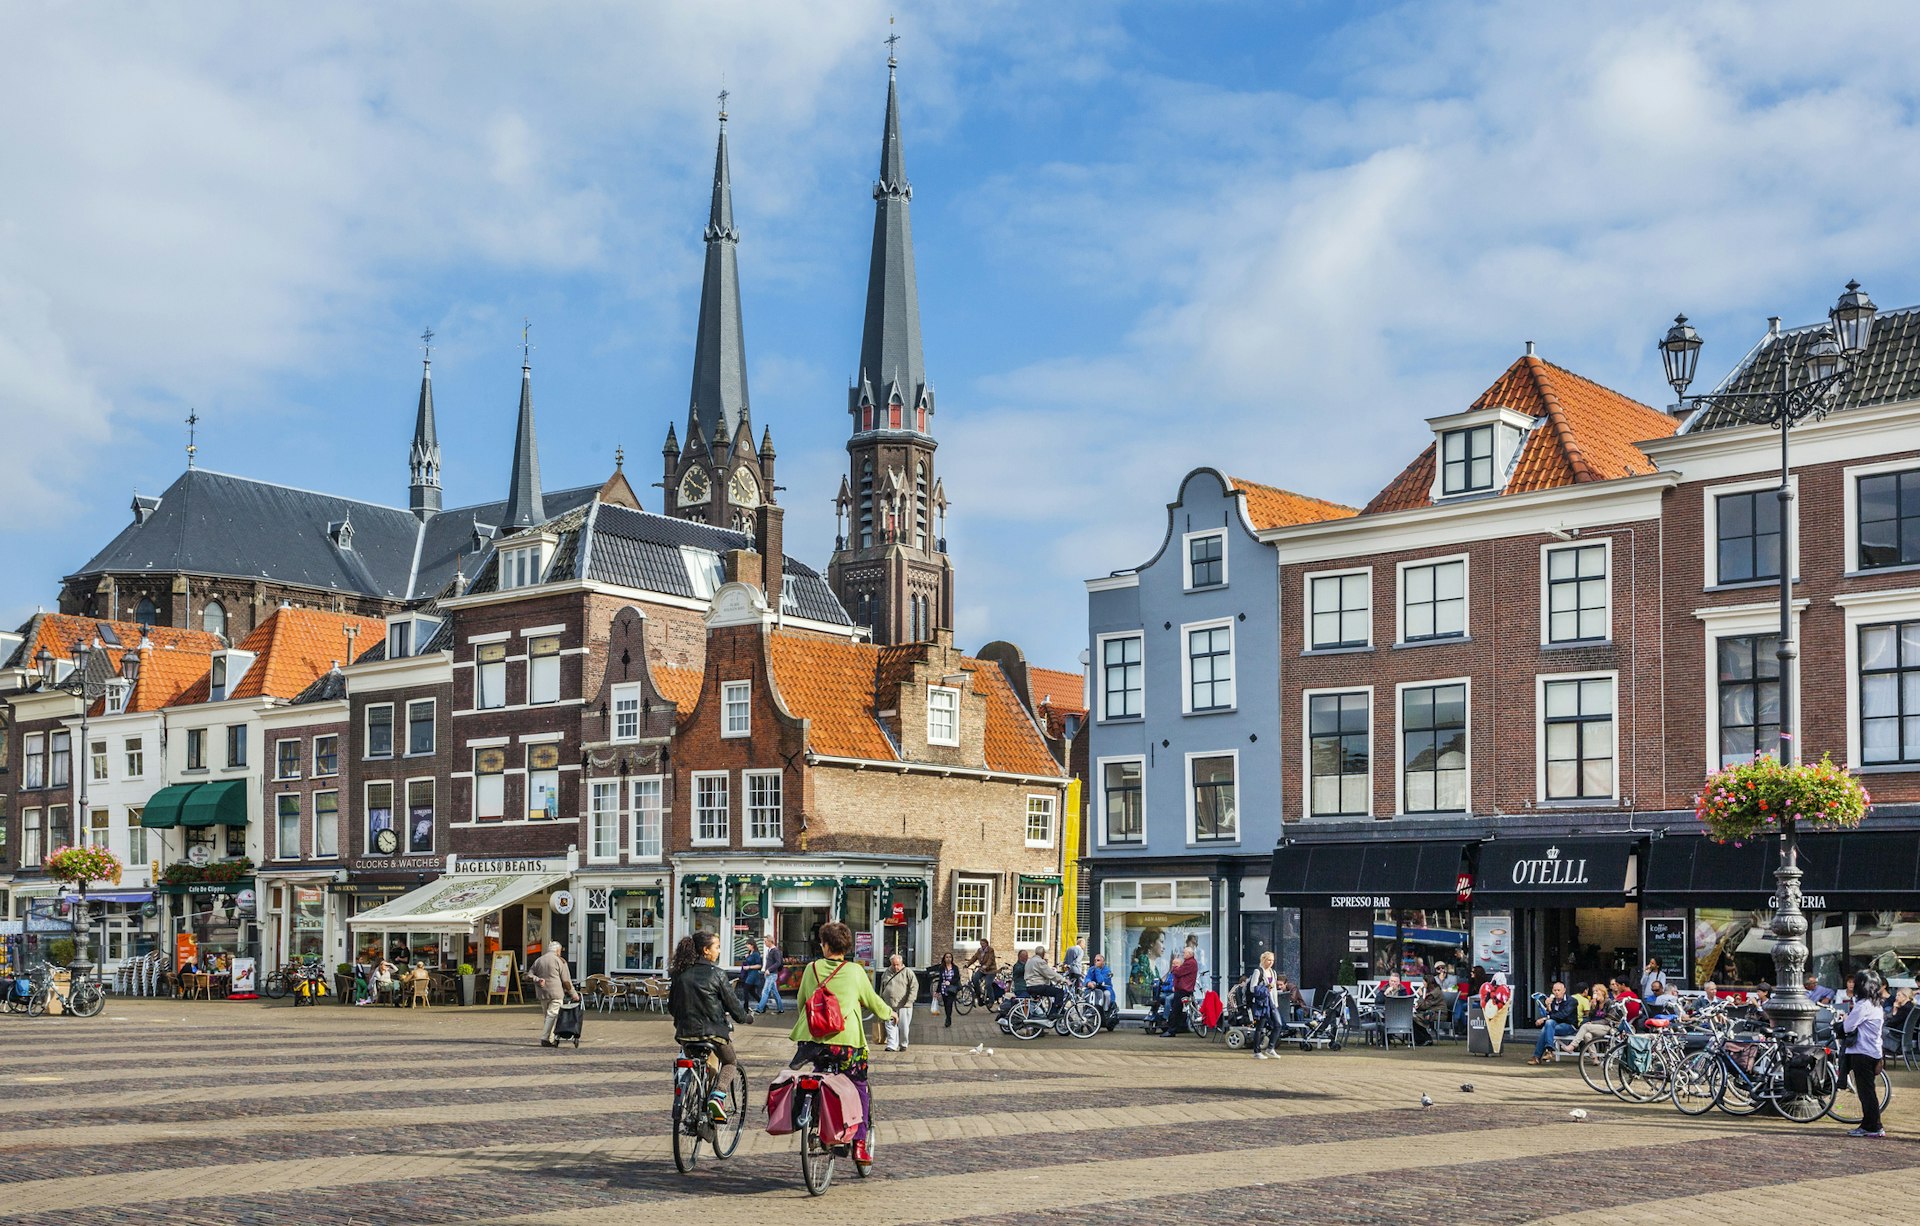 Delft, Markt, view of the market square with the spires of Maria van Jesse Church in the background